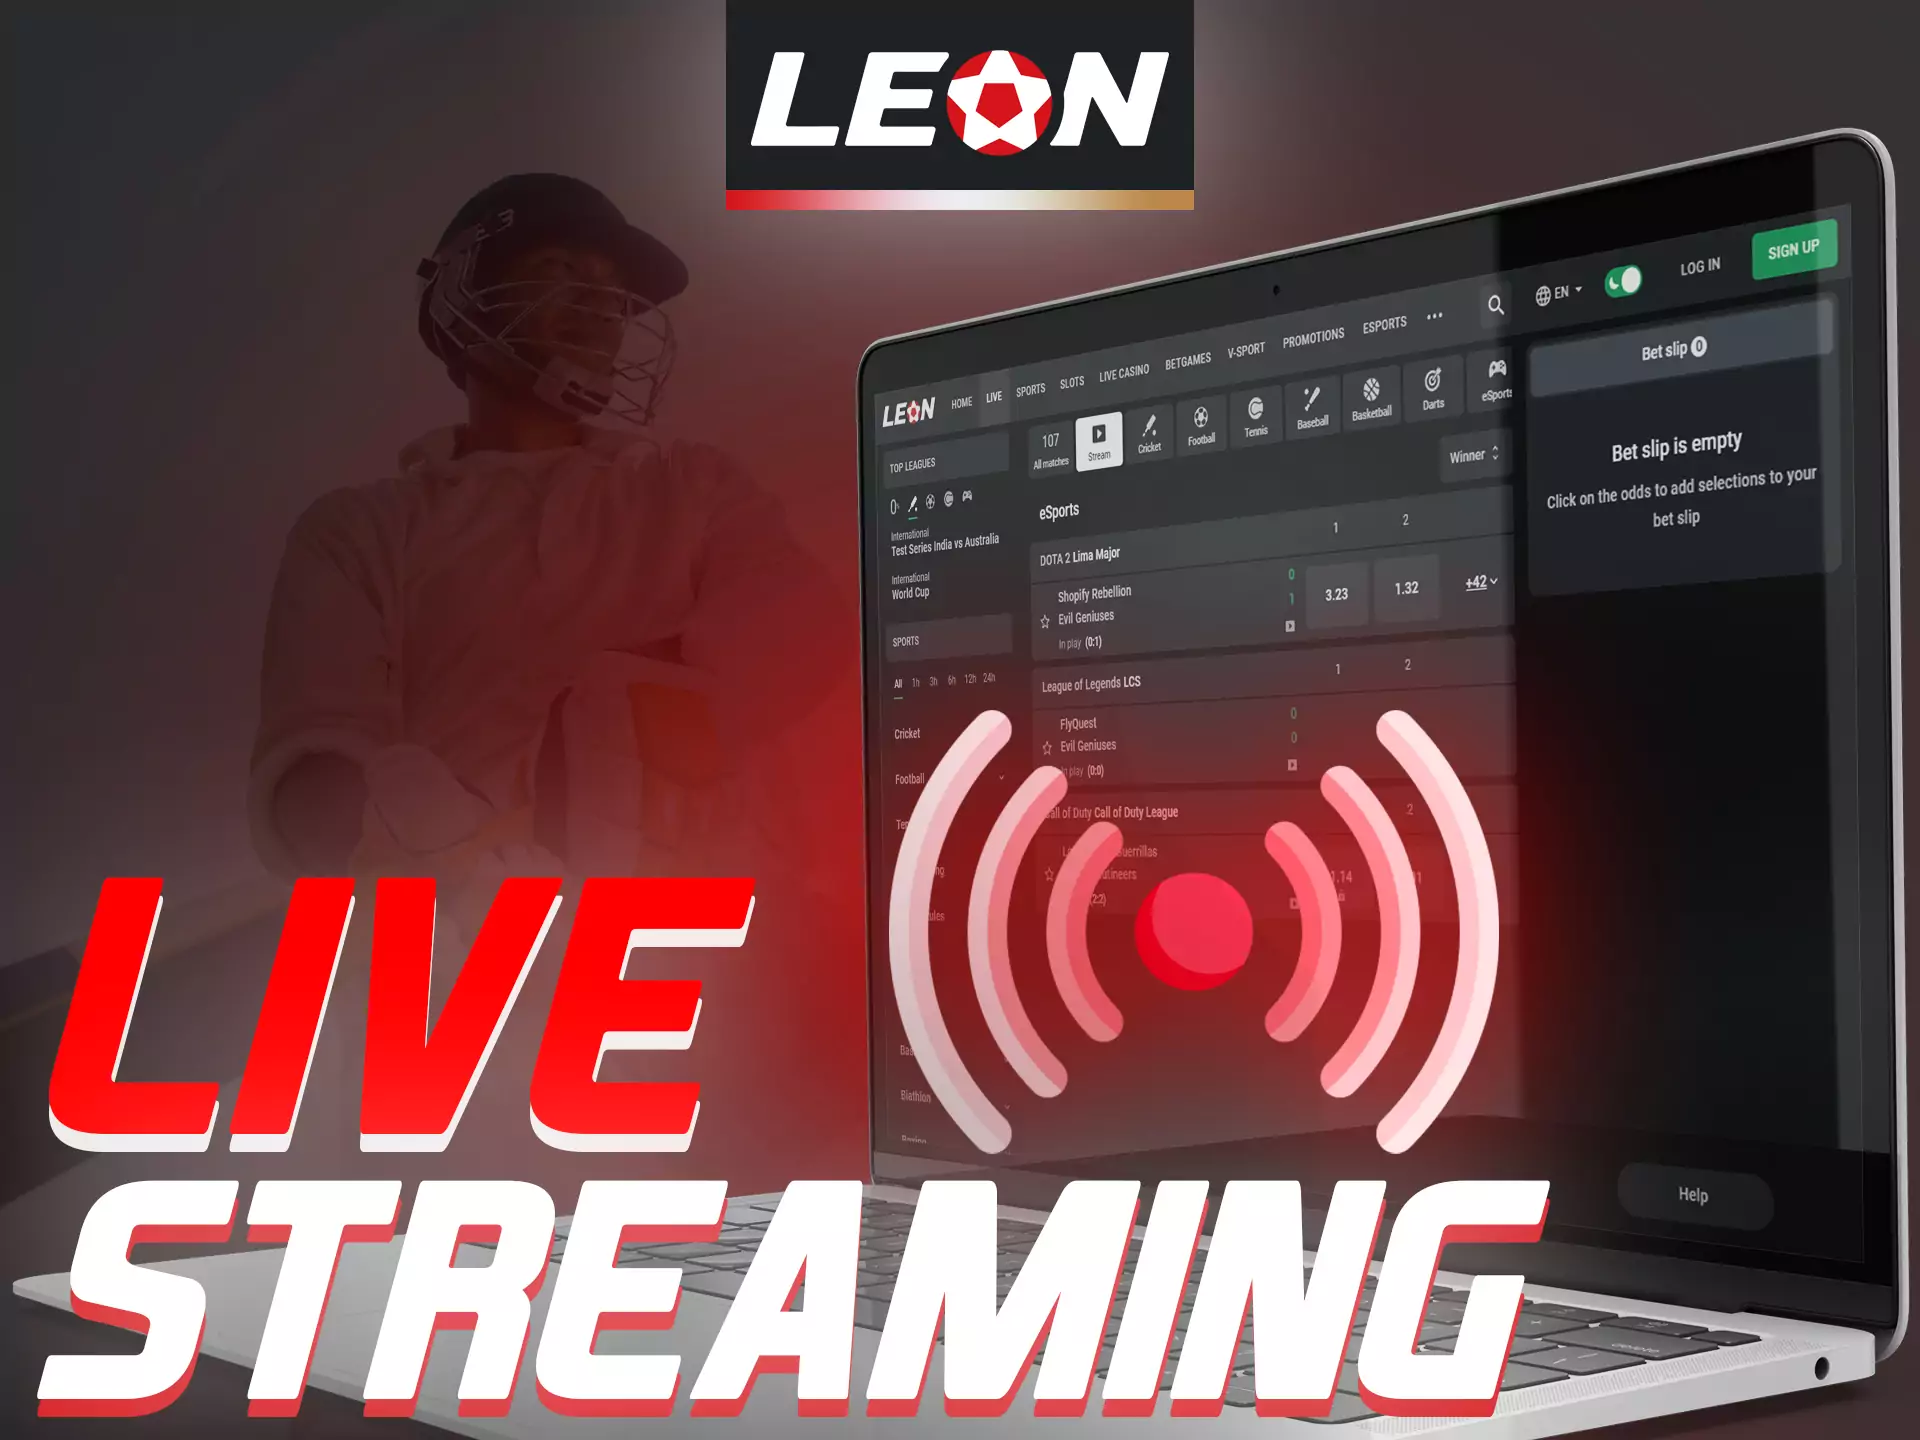 At Leonbet, you can bet on matches while you're live streaming.